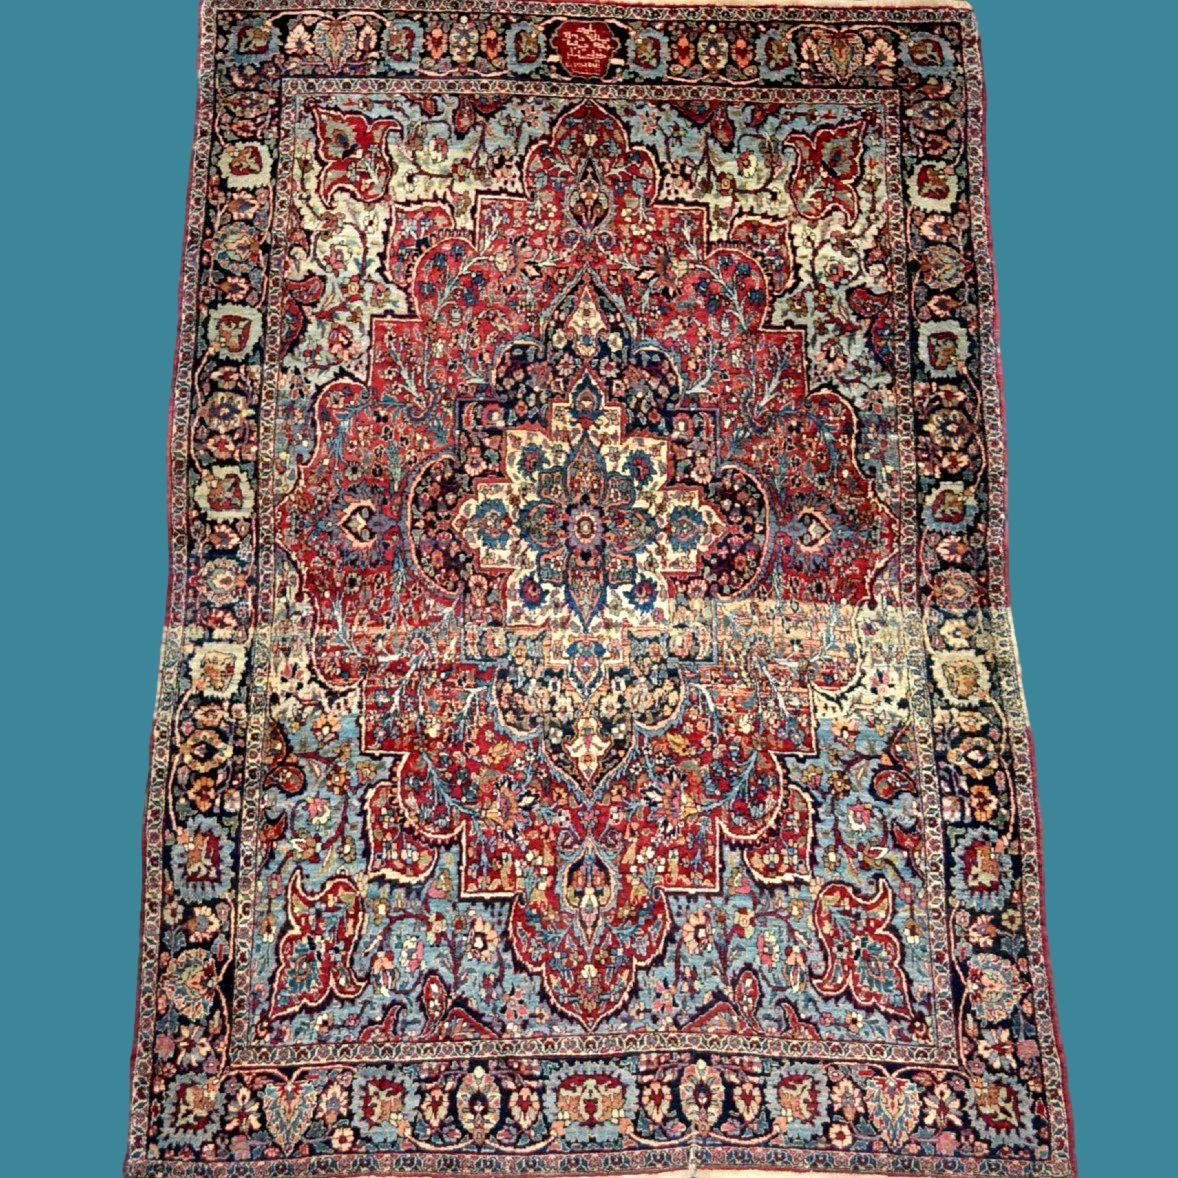 Old Ghoum Rug, 135 Cm X 197 Cm, Signed, Dated, Hand-knotted Wool & Silk, Iran, Very Good Condition-photo-7